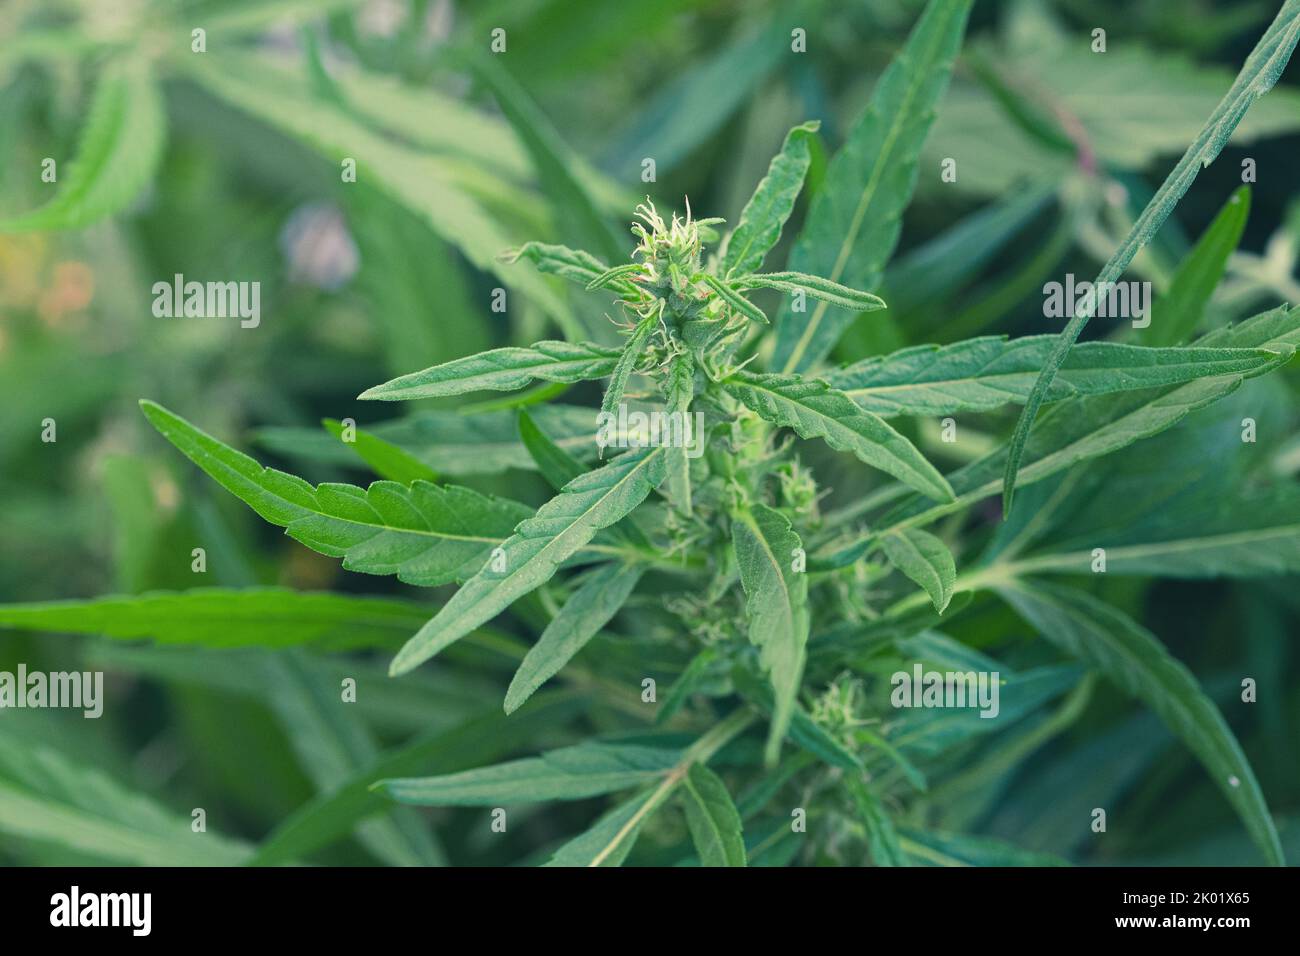 Top part of weed, marijuana or cannabis plant with bud and green leaves growing in a garden, close up Stock Photo